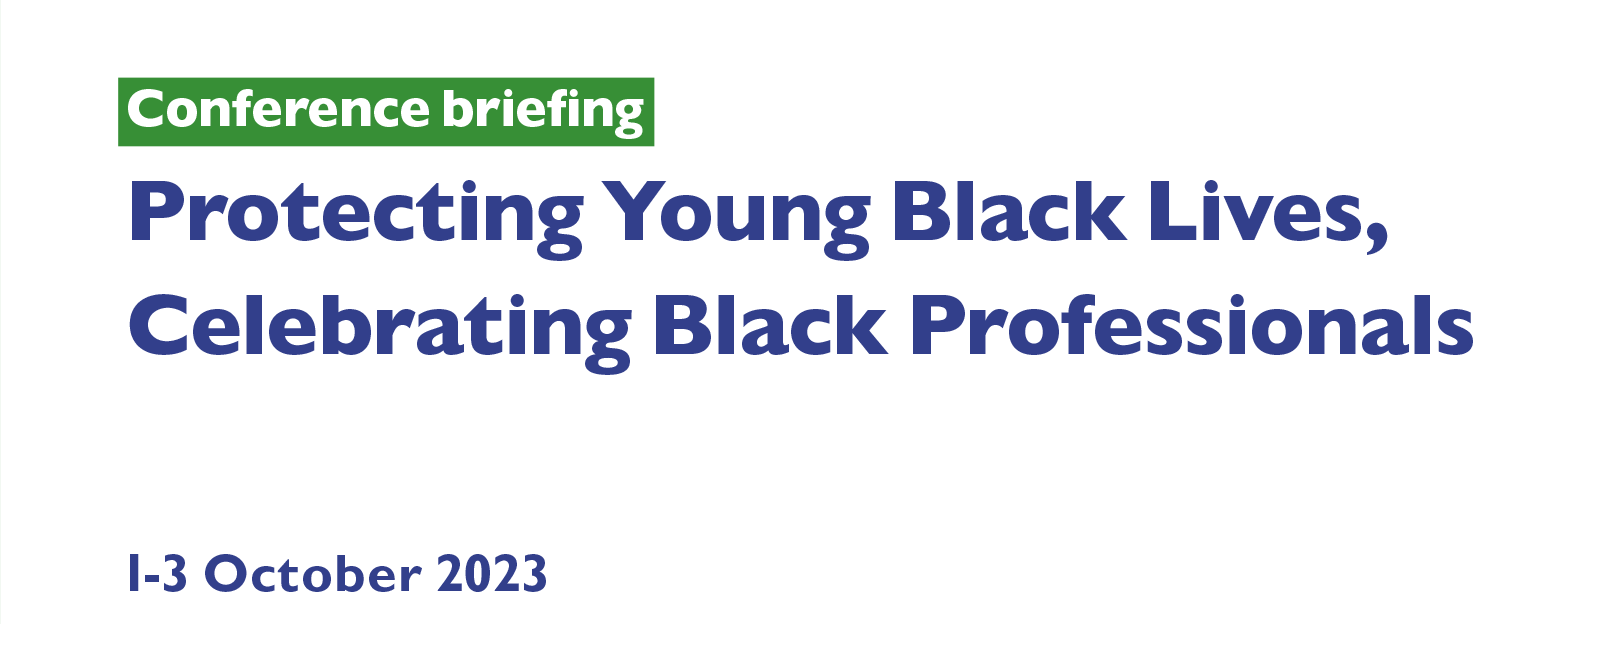 Header from the cover of the Protecting Young Black Lives, Celebrating Black Professionals Conference briefing